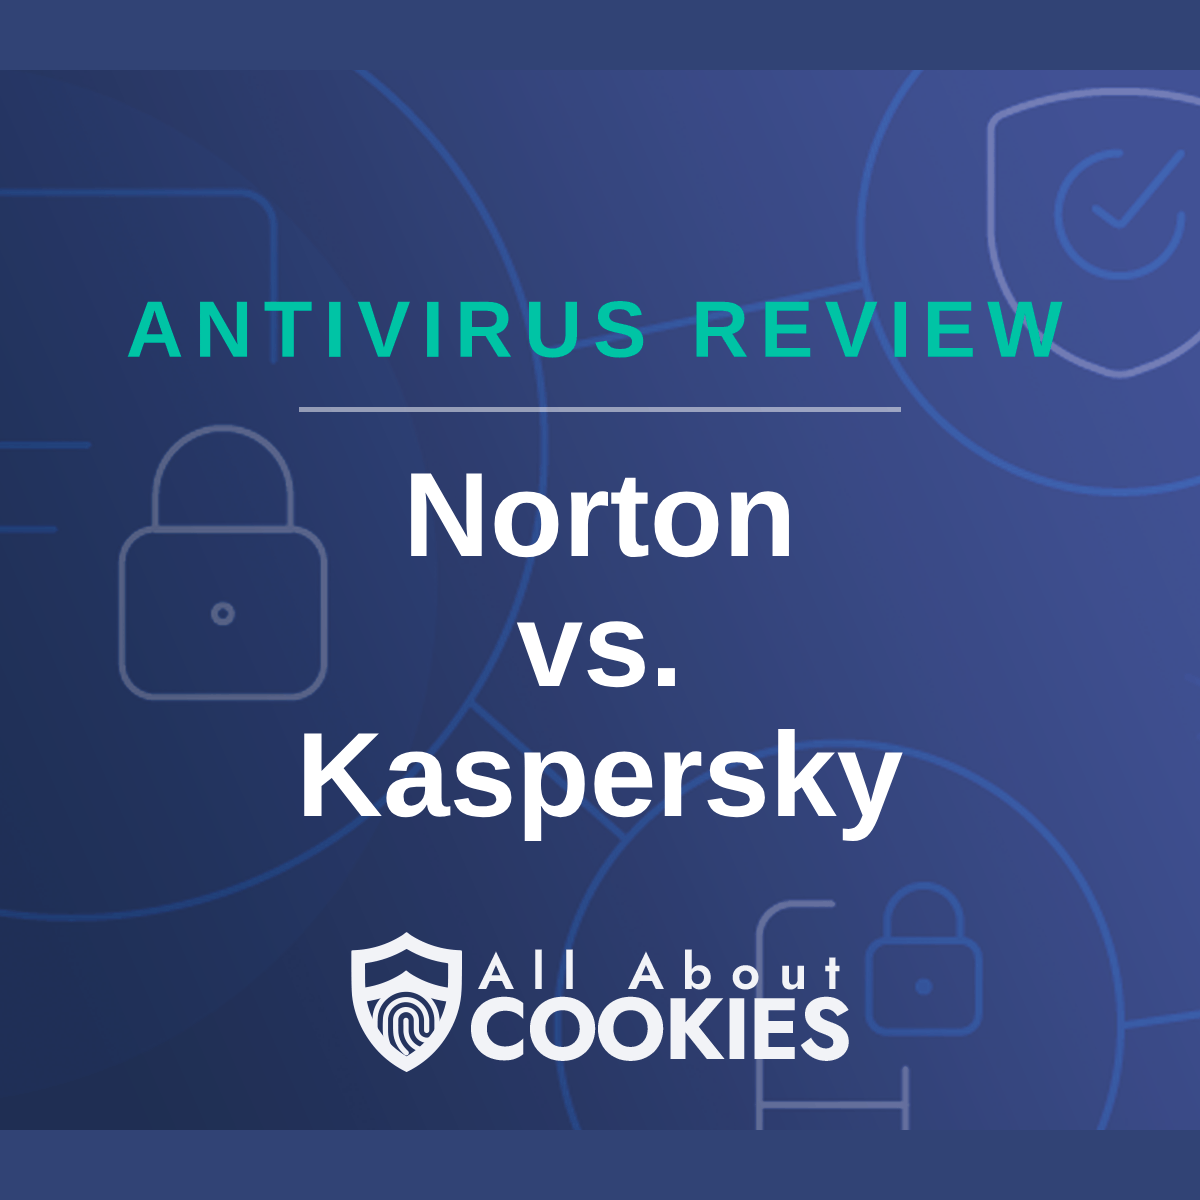 A blue background with images of locks and shields with the text "Norton vs. Kaspersky" and the All About Cookies logo. 